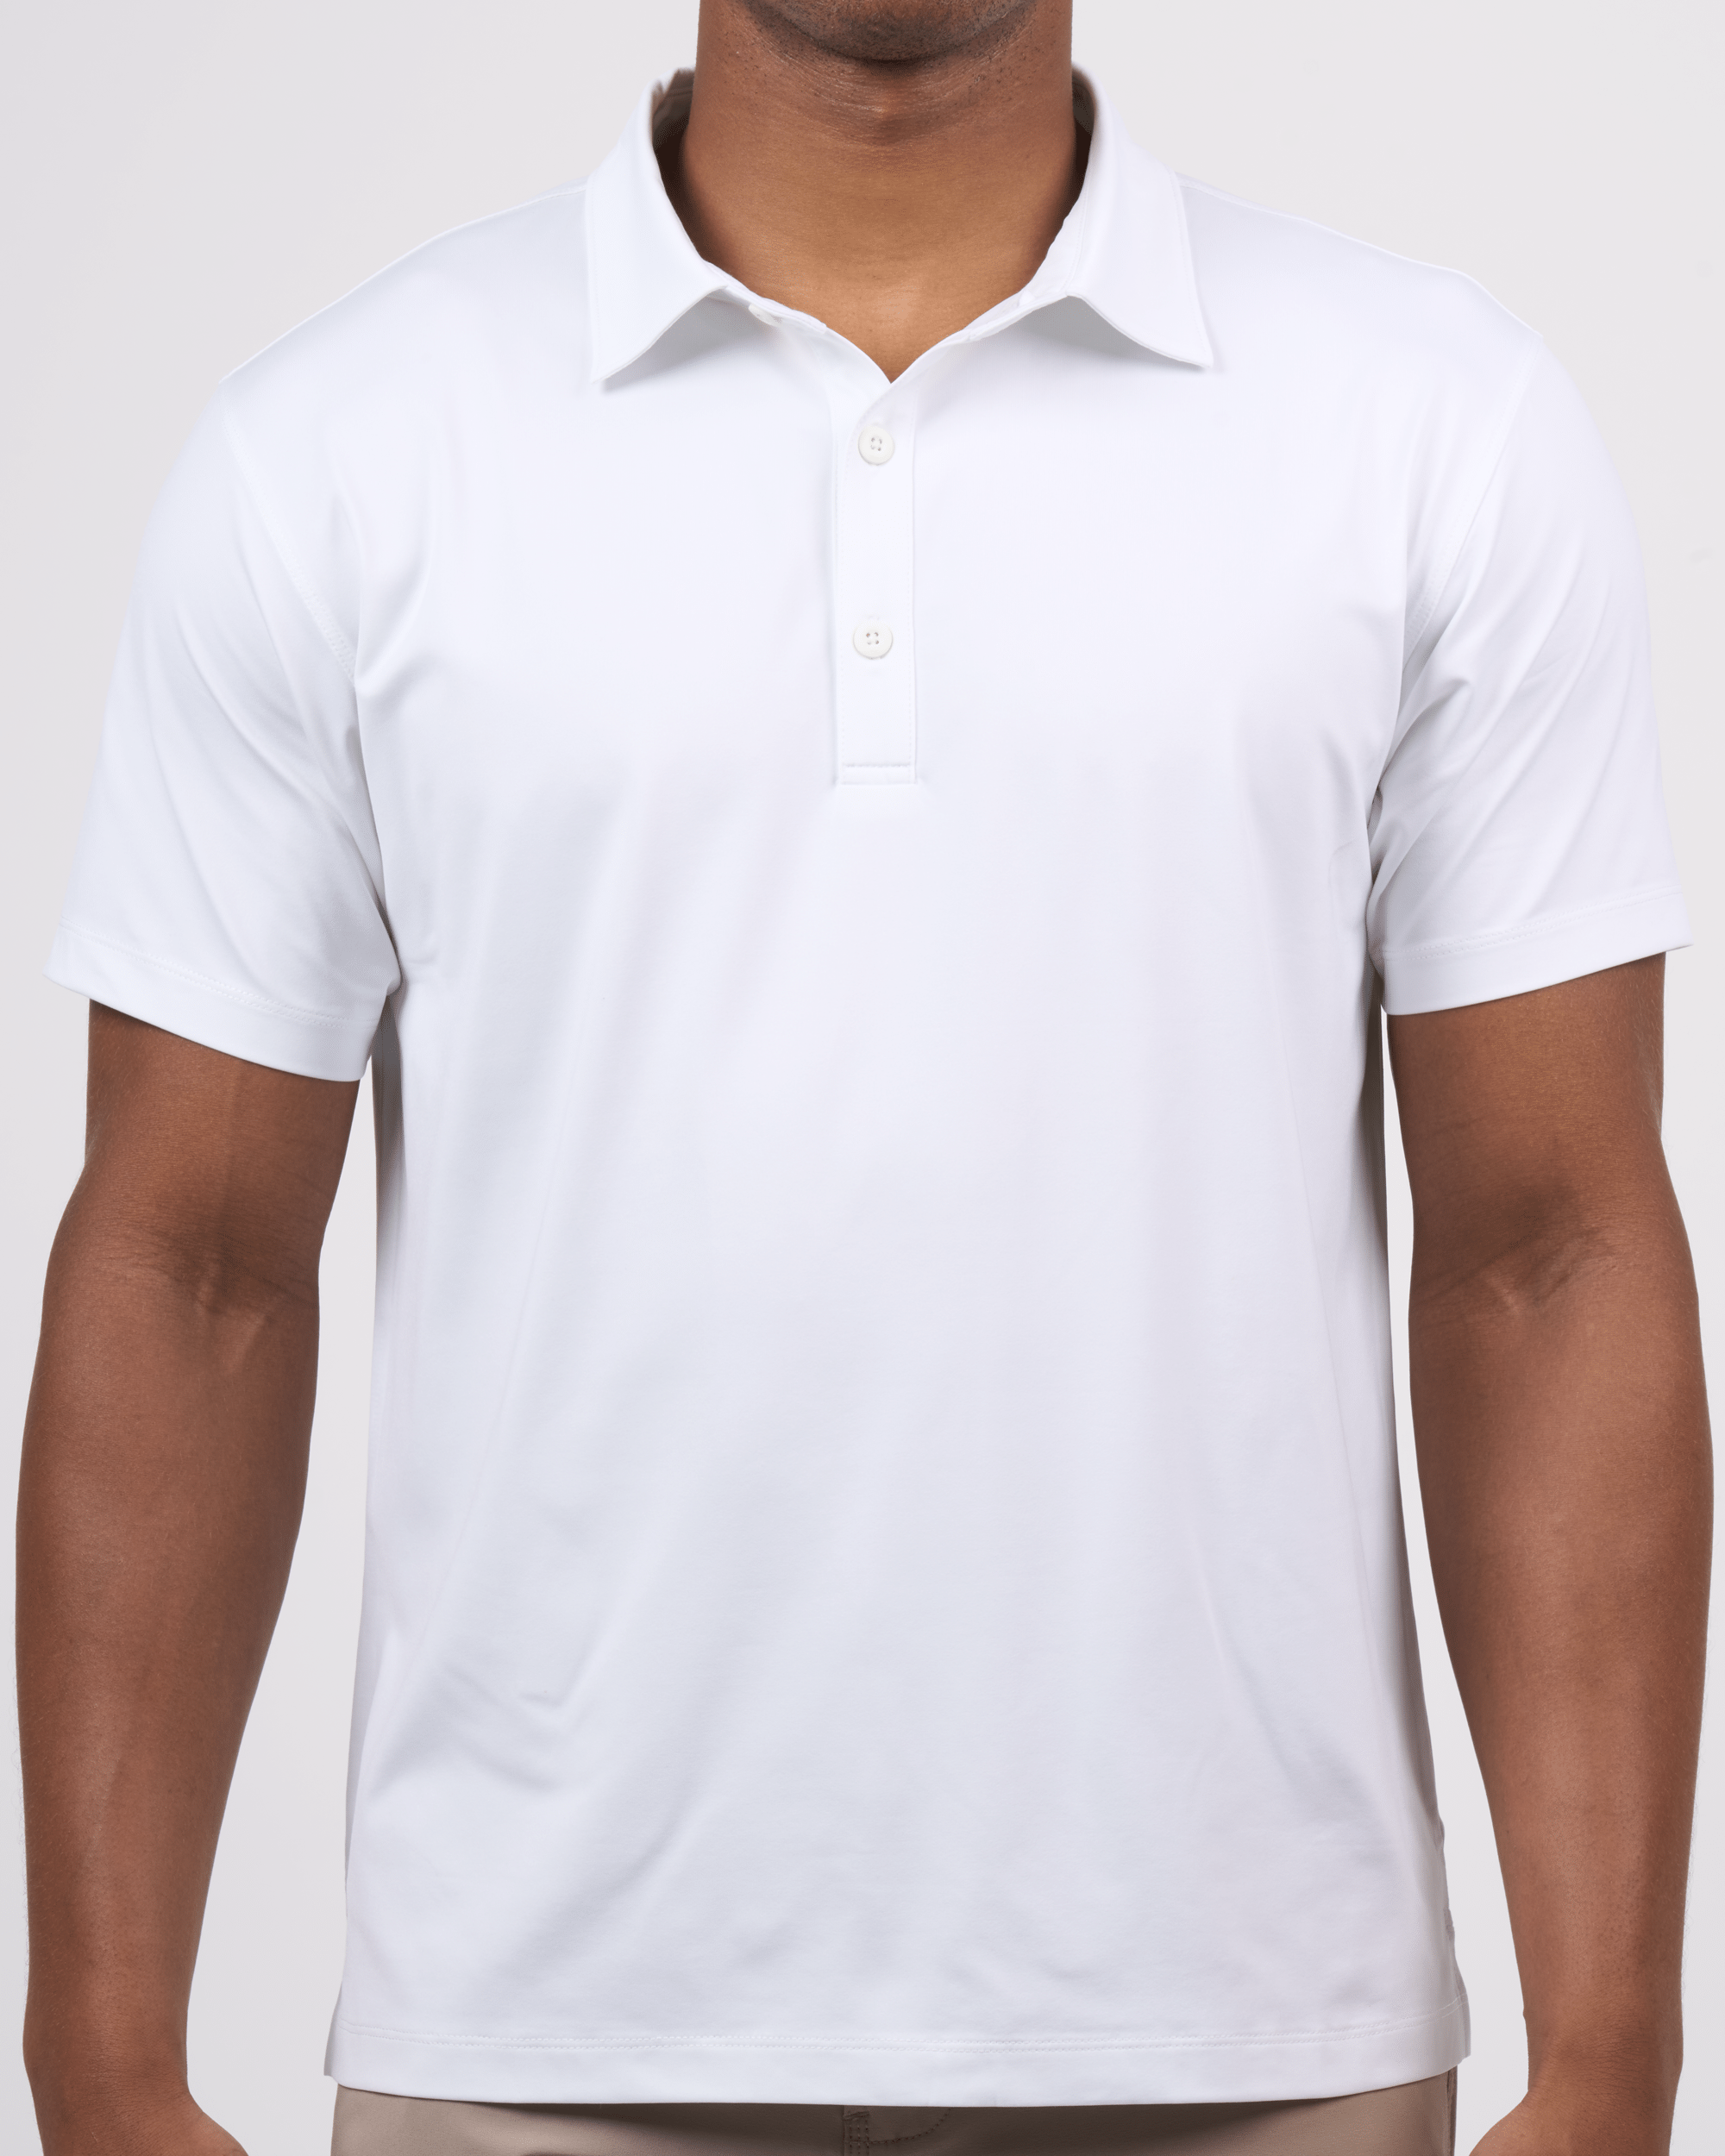 Foreign Rider Co Technical Fabric White Polo Chest 3 Button Detail